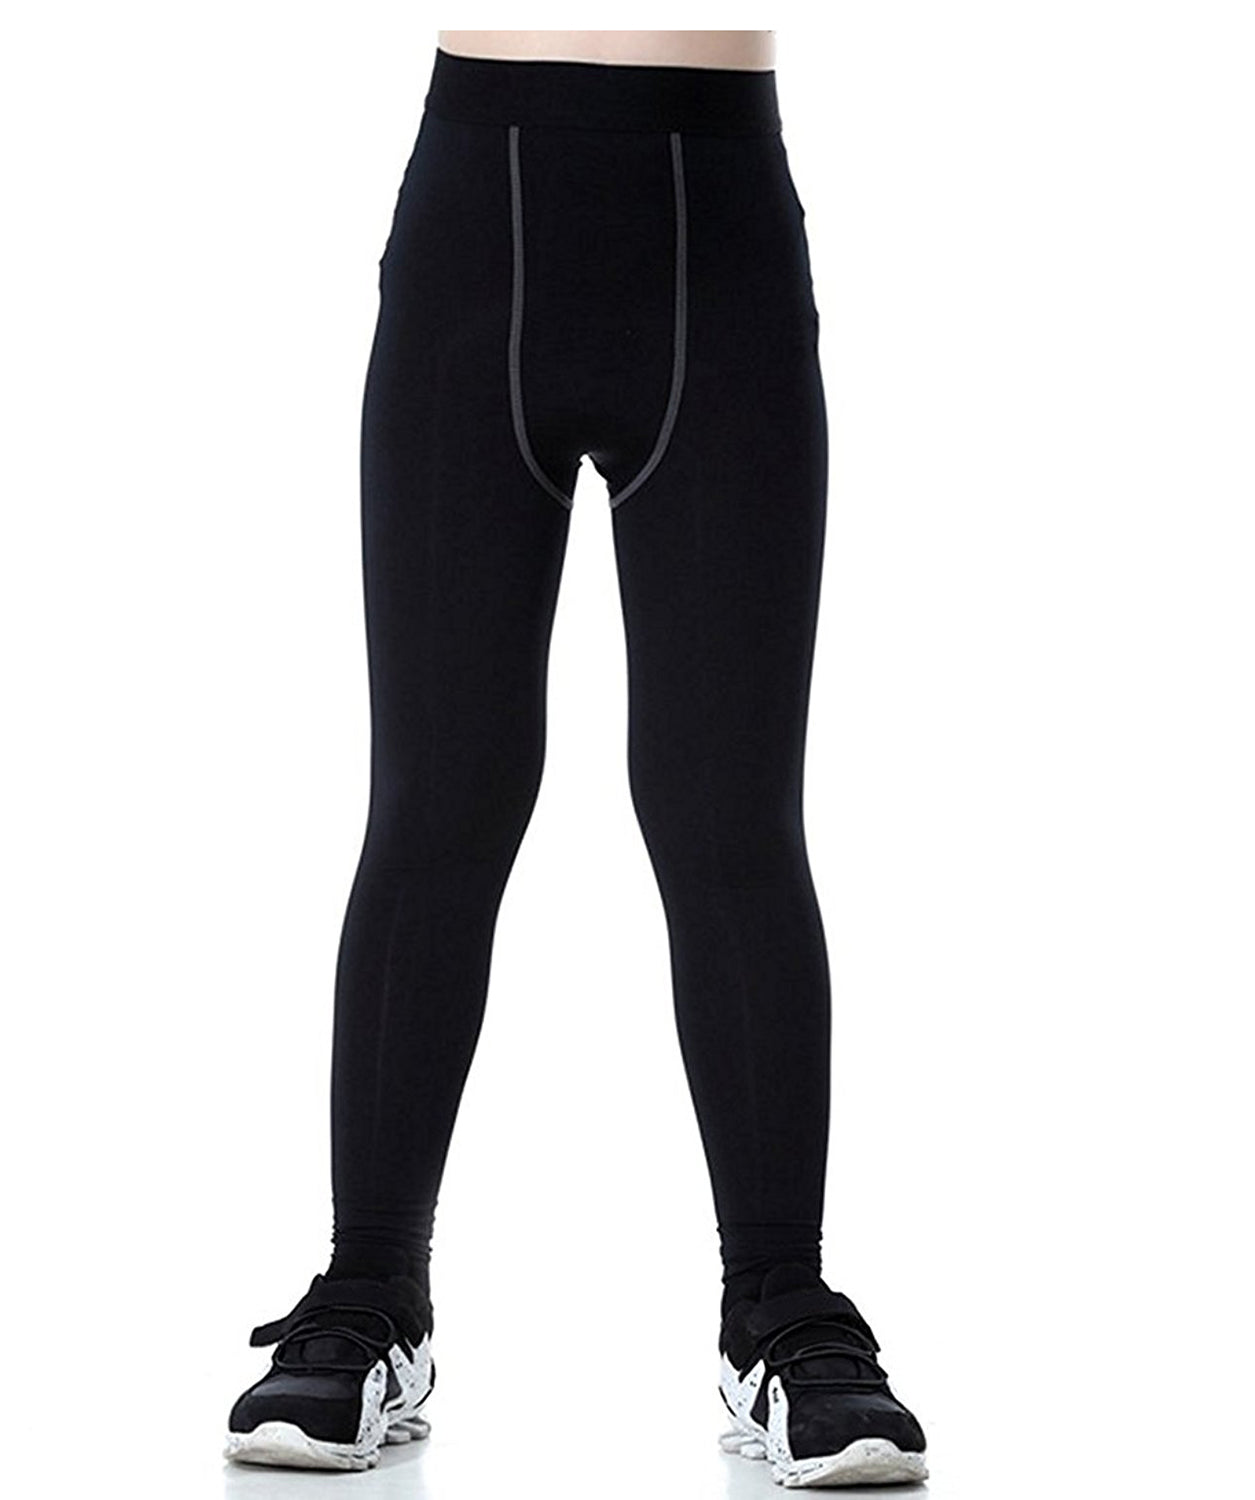 Men Compression Pants Athletic Thermal Workout Running Tights Base